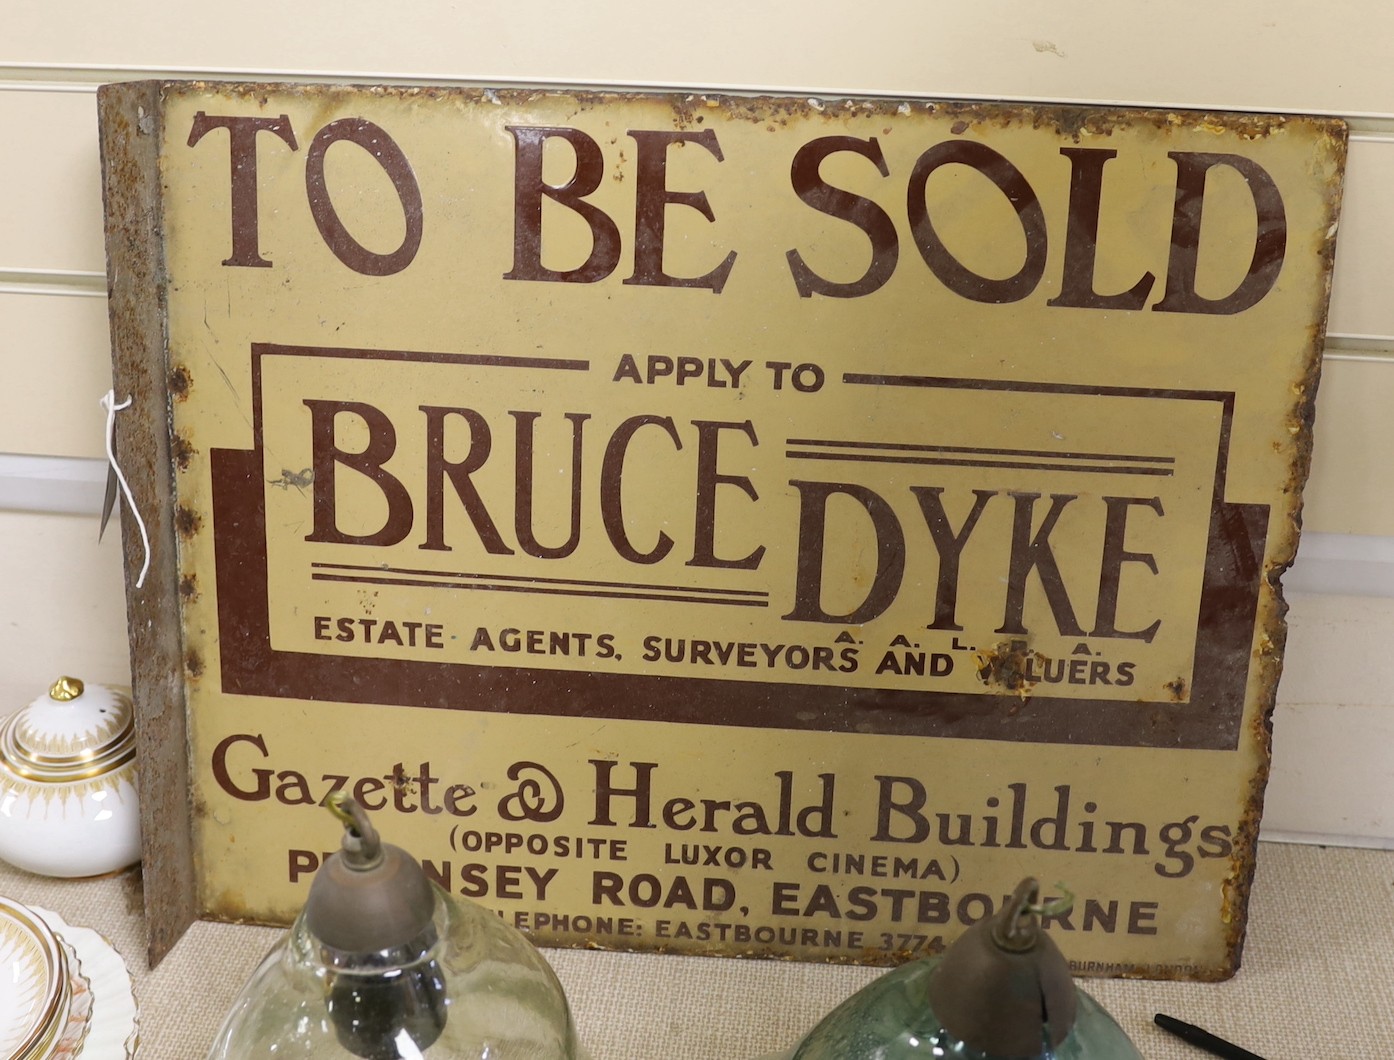 Eastbourne Interest - A ‘To be sold’ enamel sign - Bruce Dyke estate agents surveyors and valuers, 41cm high